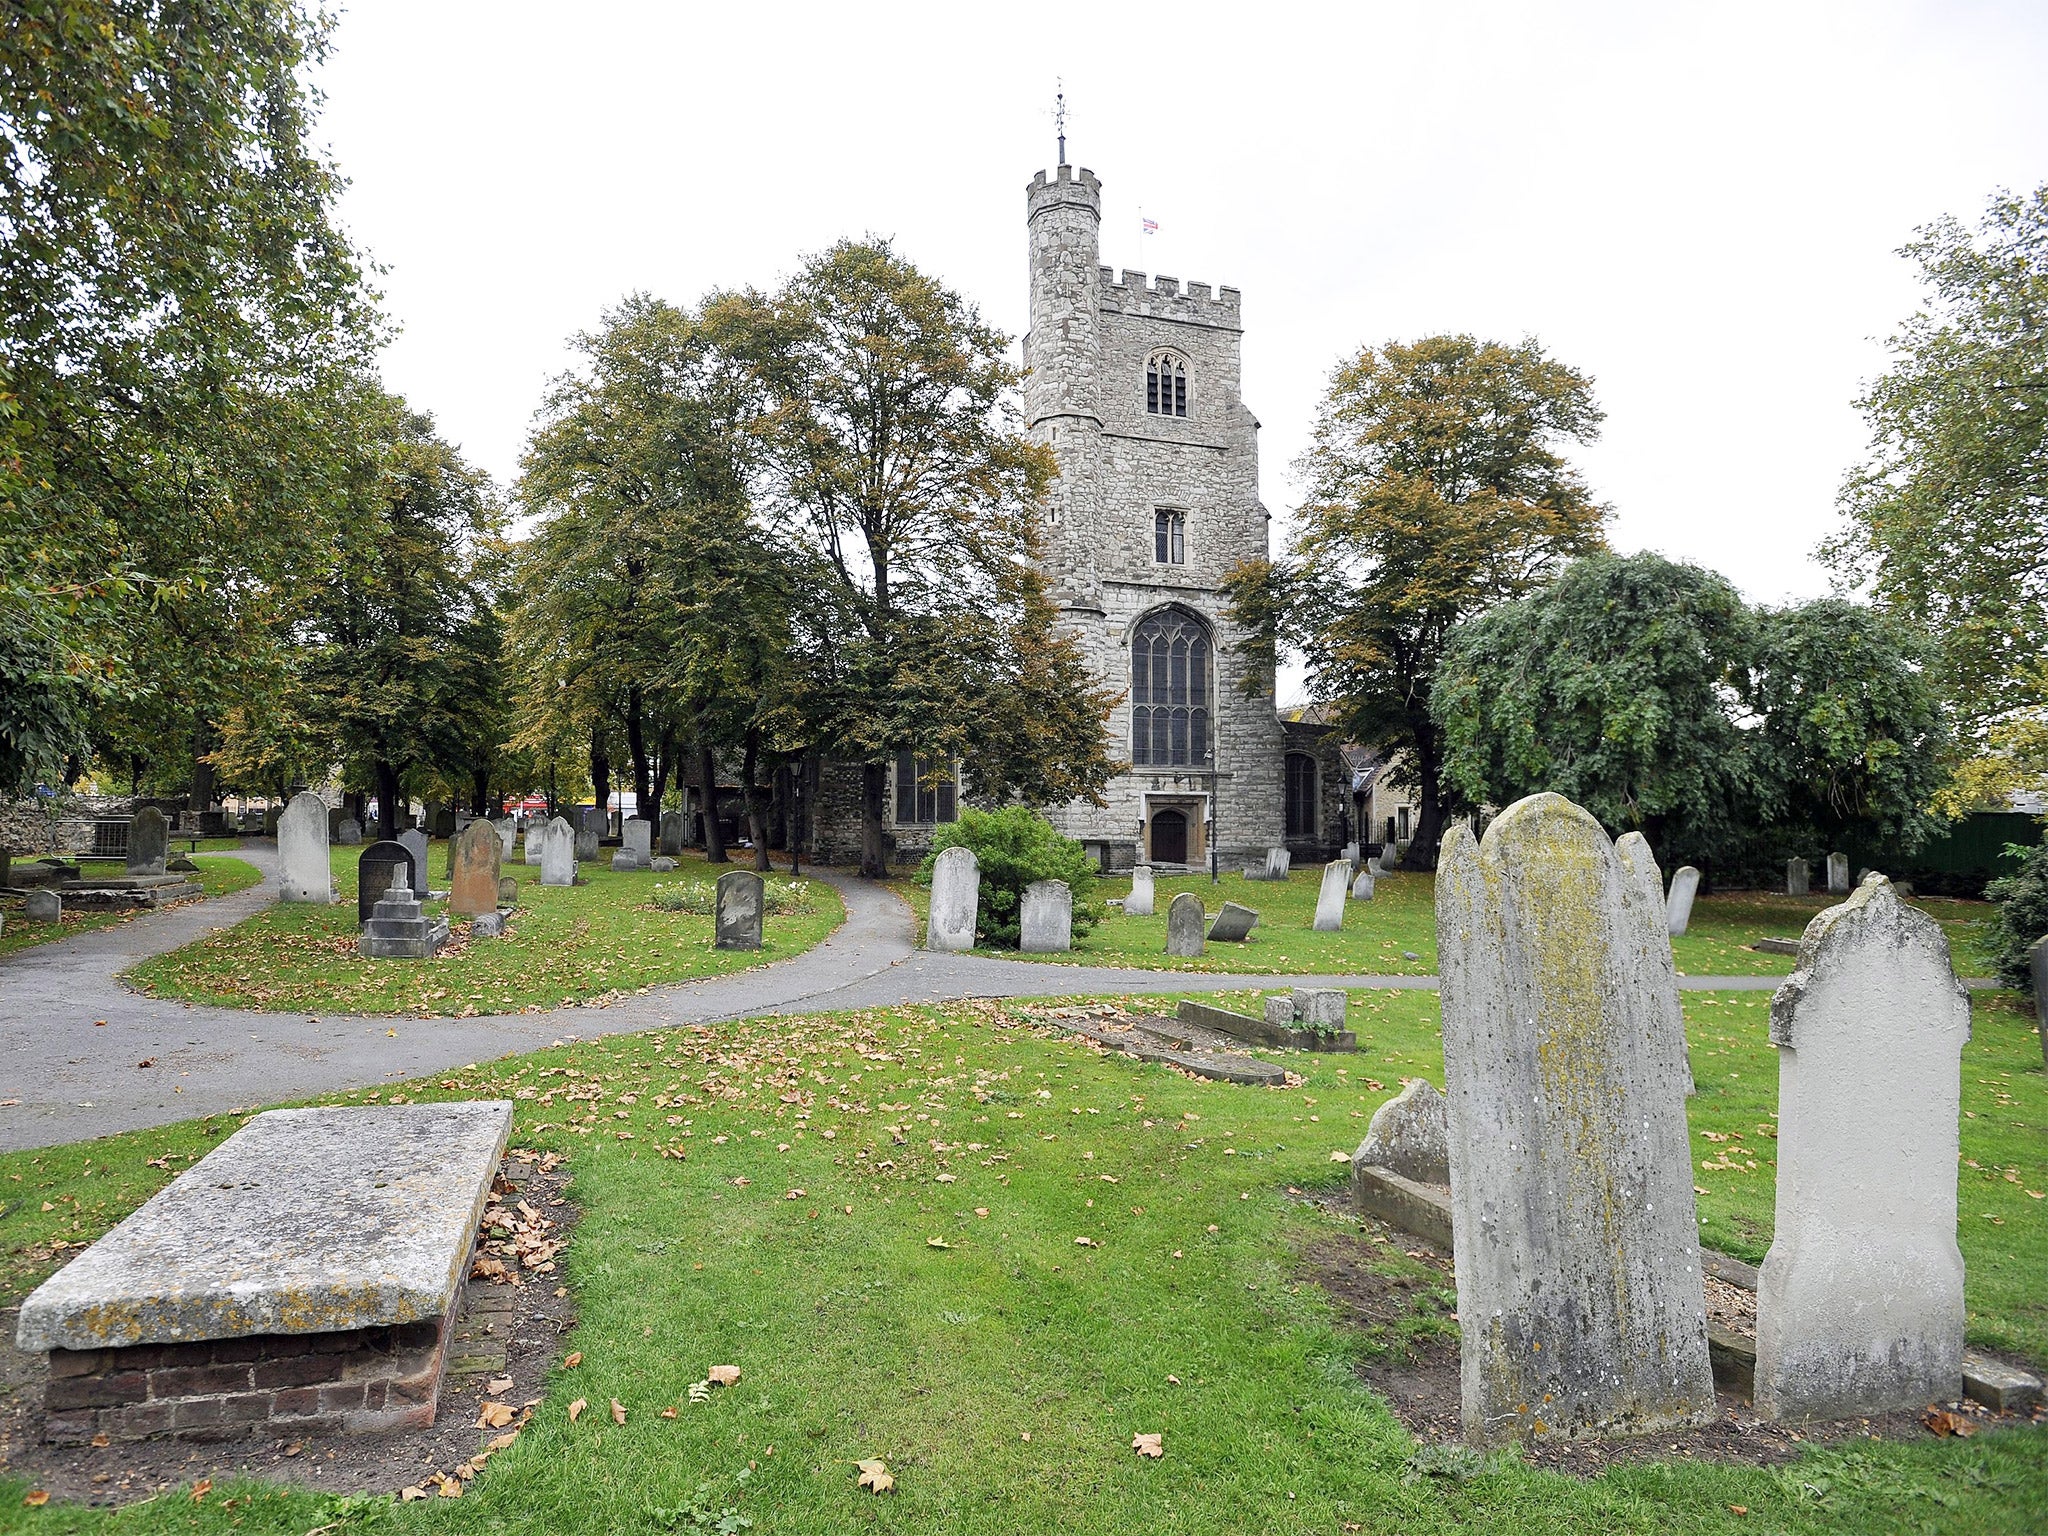 Stephen Port is accused of dumping his victims bodies within the grounds of St Margaret's Church in Barking (PA)